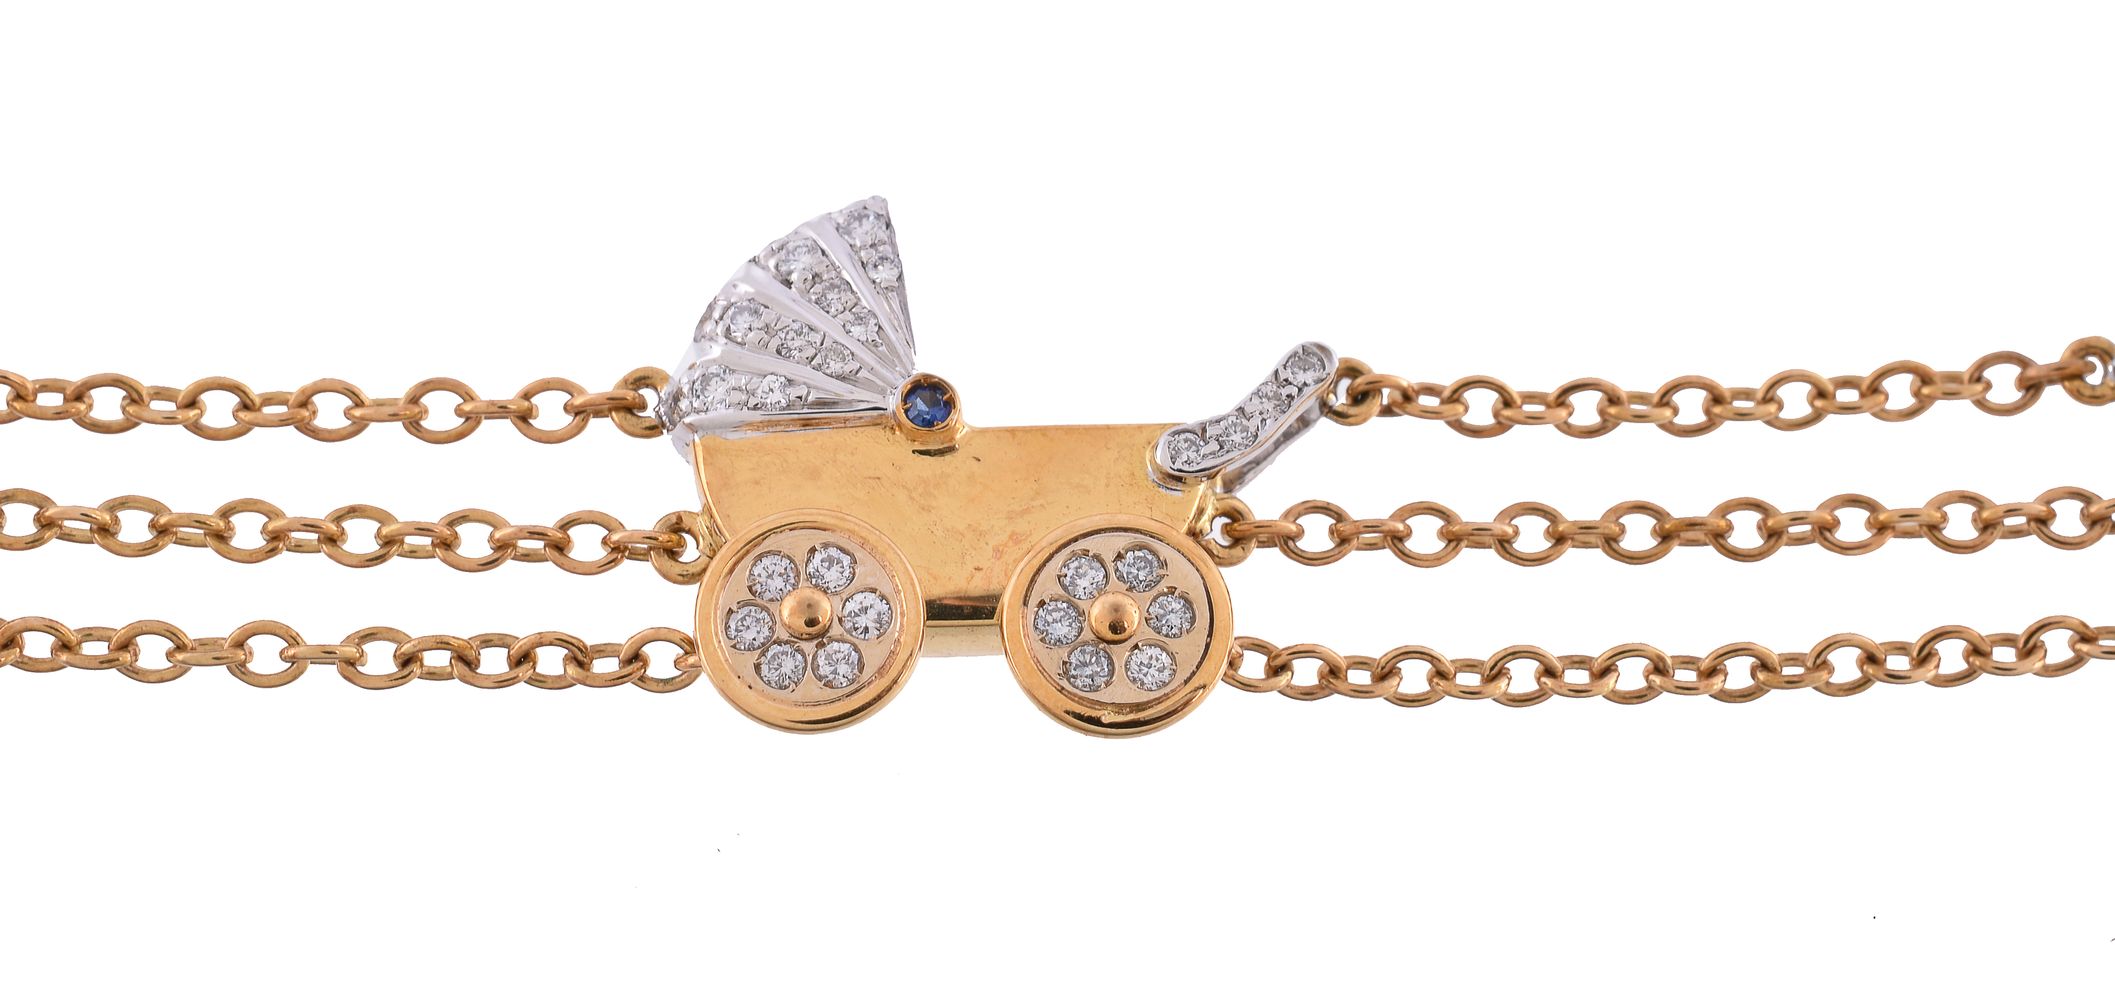 A diamond and sapphire baby carriage bracelet - Image 2 of 2